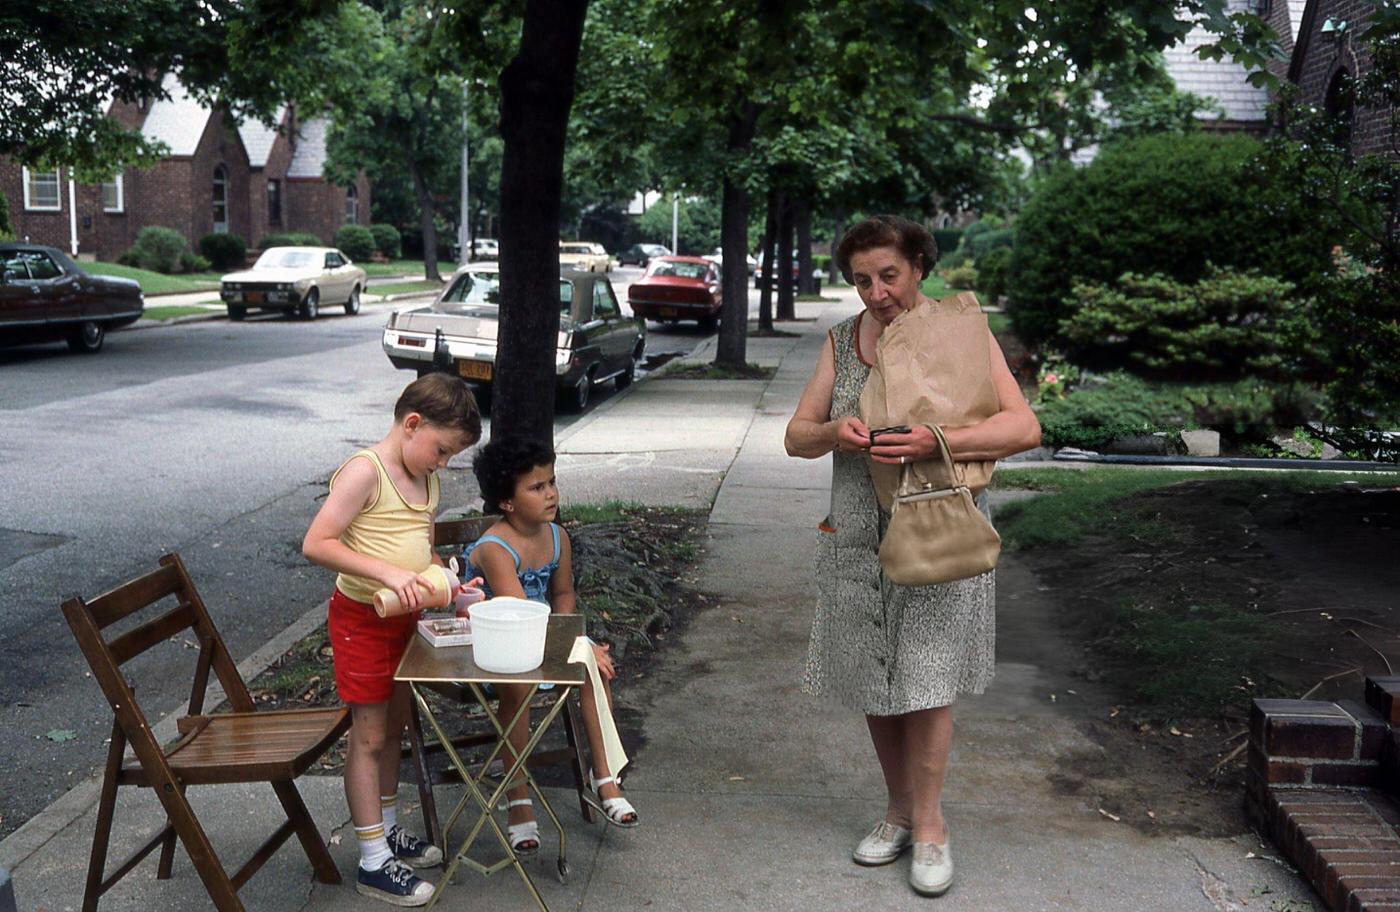 Two Children At A Lemonade Stand Pouring A Drink For A Passerby On Fitchett Street In Rego Park, Queens, 1970S.